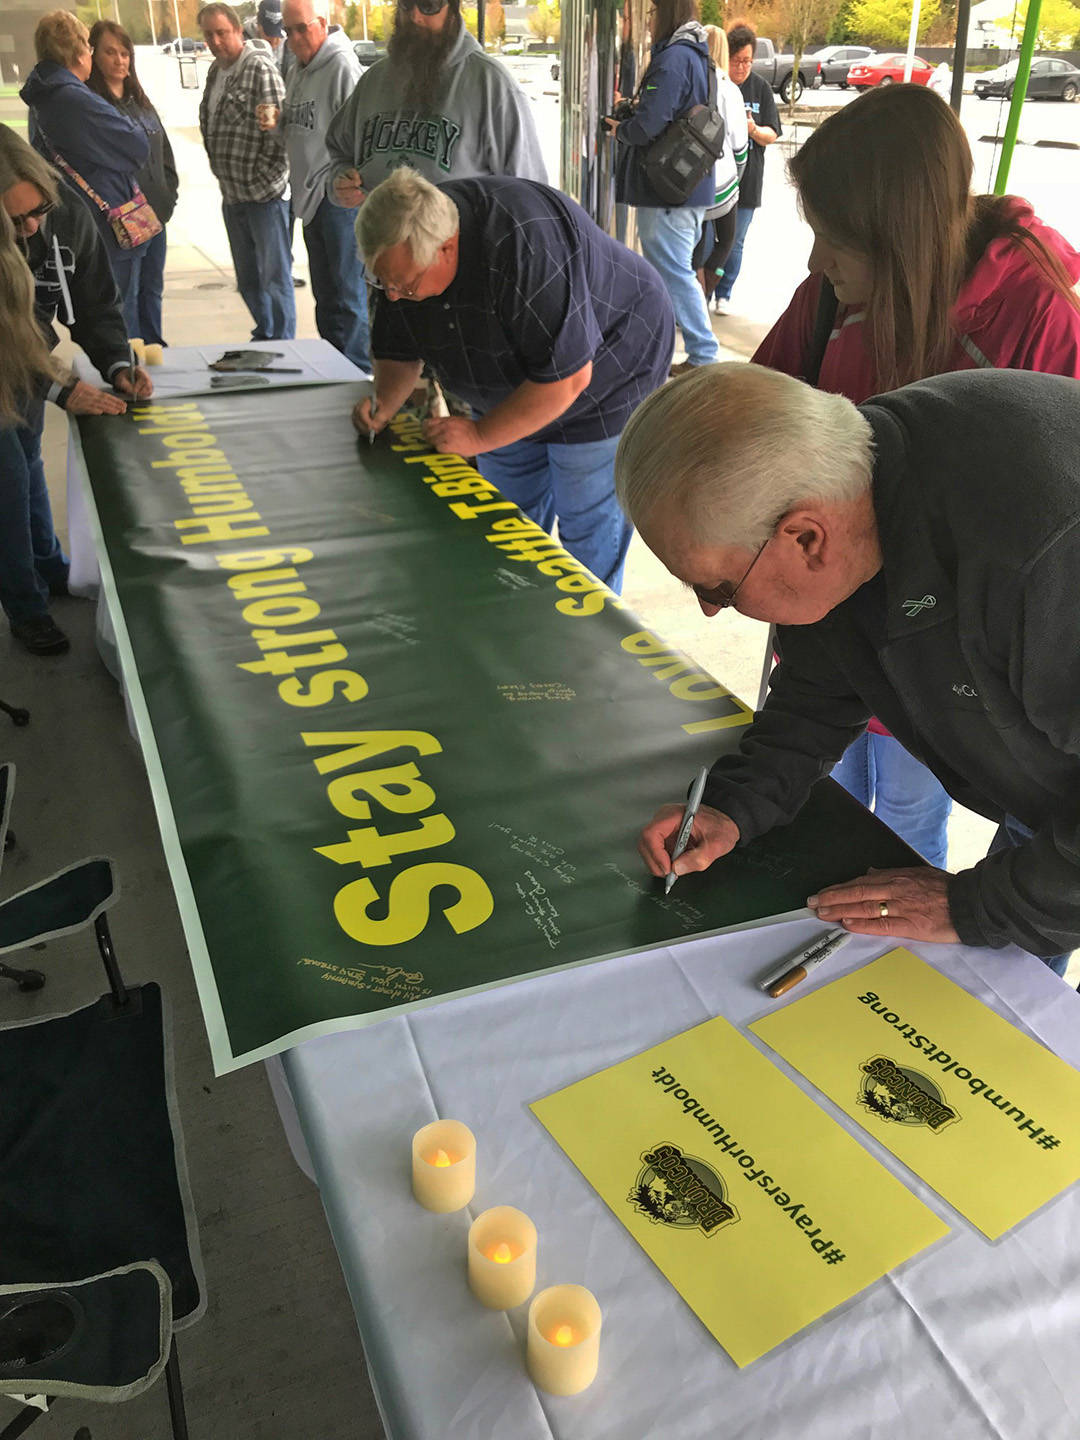 Bruce McDonald, foreground, and his 15-year-old daughter, Chloe, join others outside the accesso ShoWare Center on Saturday in signing a banner supporting the Humboldt, Saskatchewan junior hockey team. MARK KLAAS, Kent Reporter